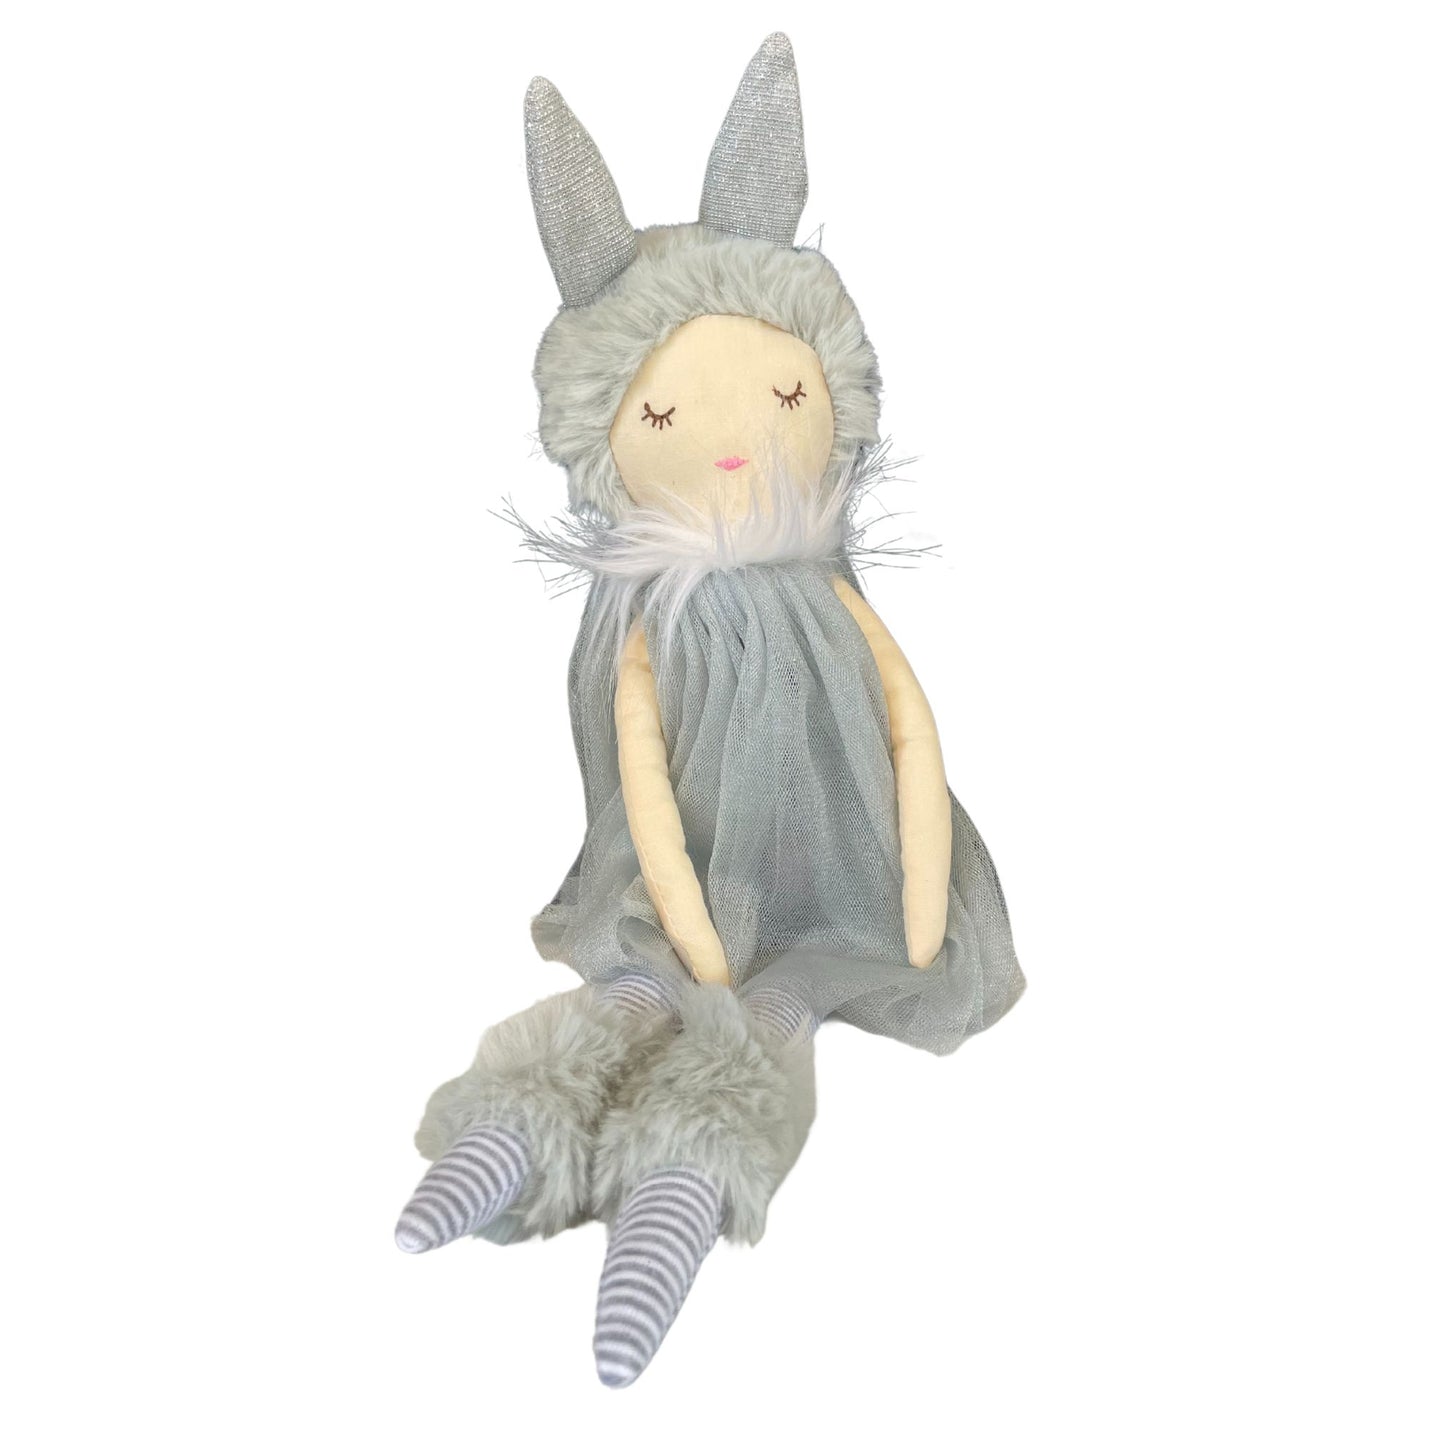 Sleepy Luna doll soft toy. Pretty little doll wearing a great dress with a fluffy great hat and sliver bunny ears.